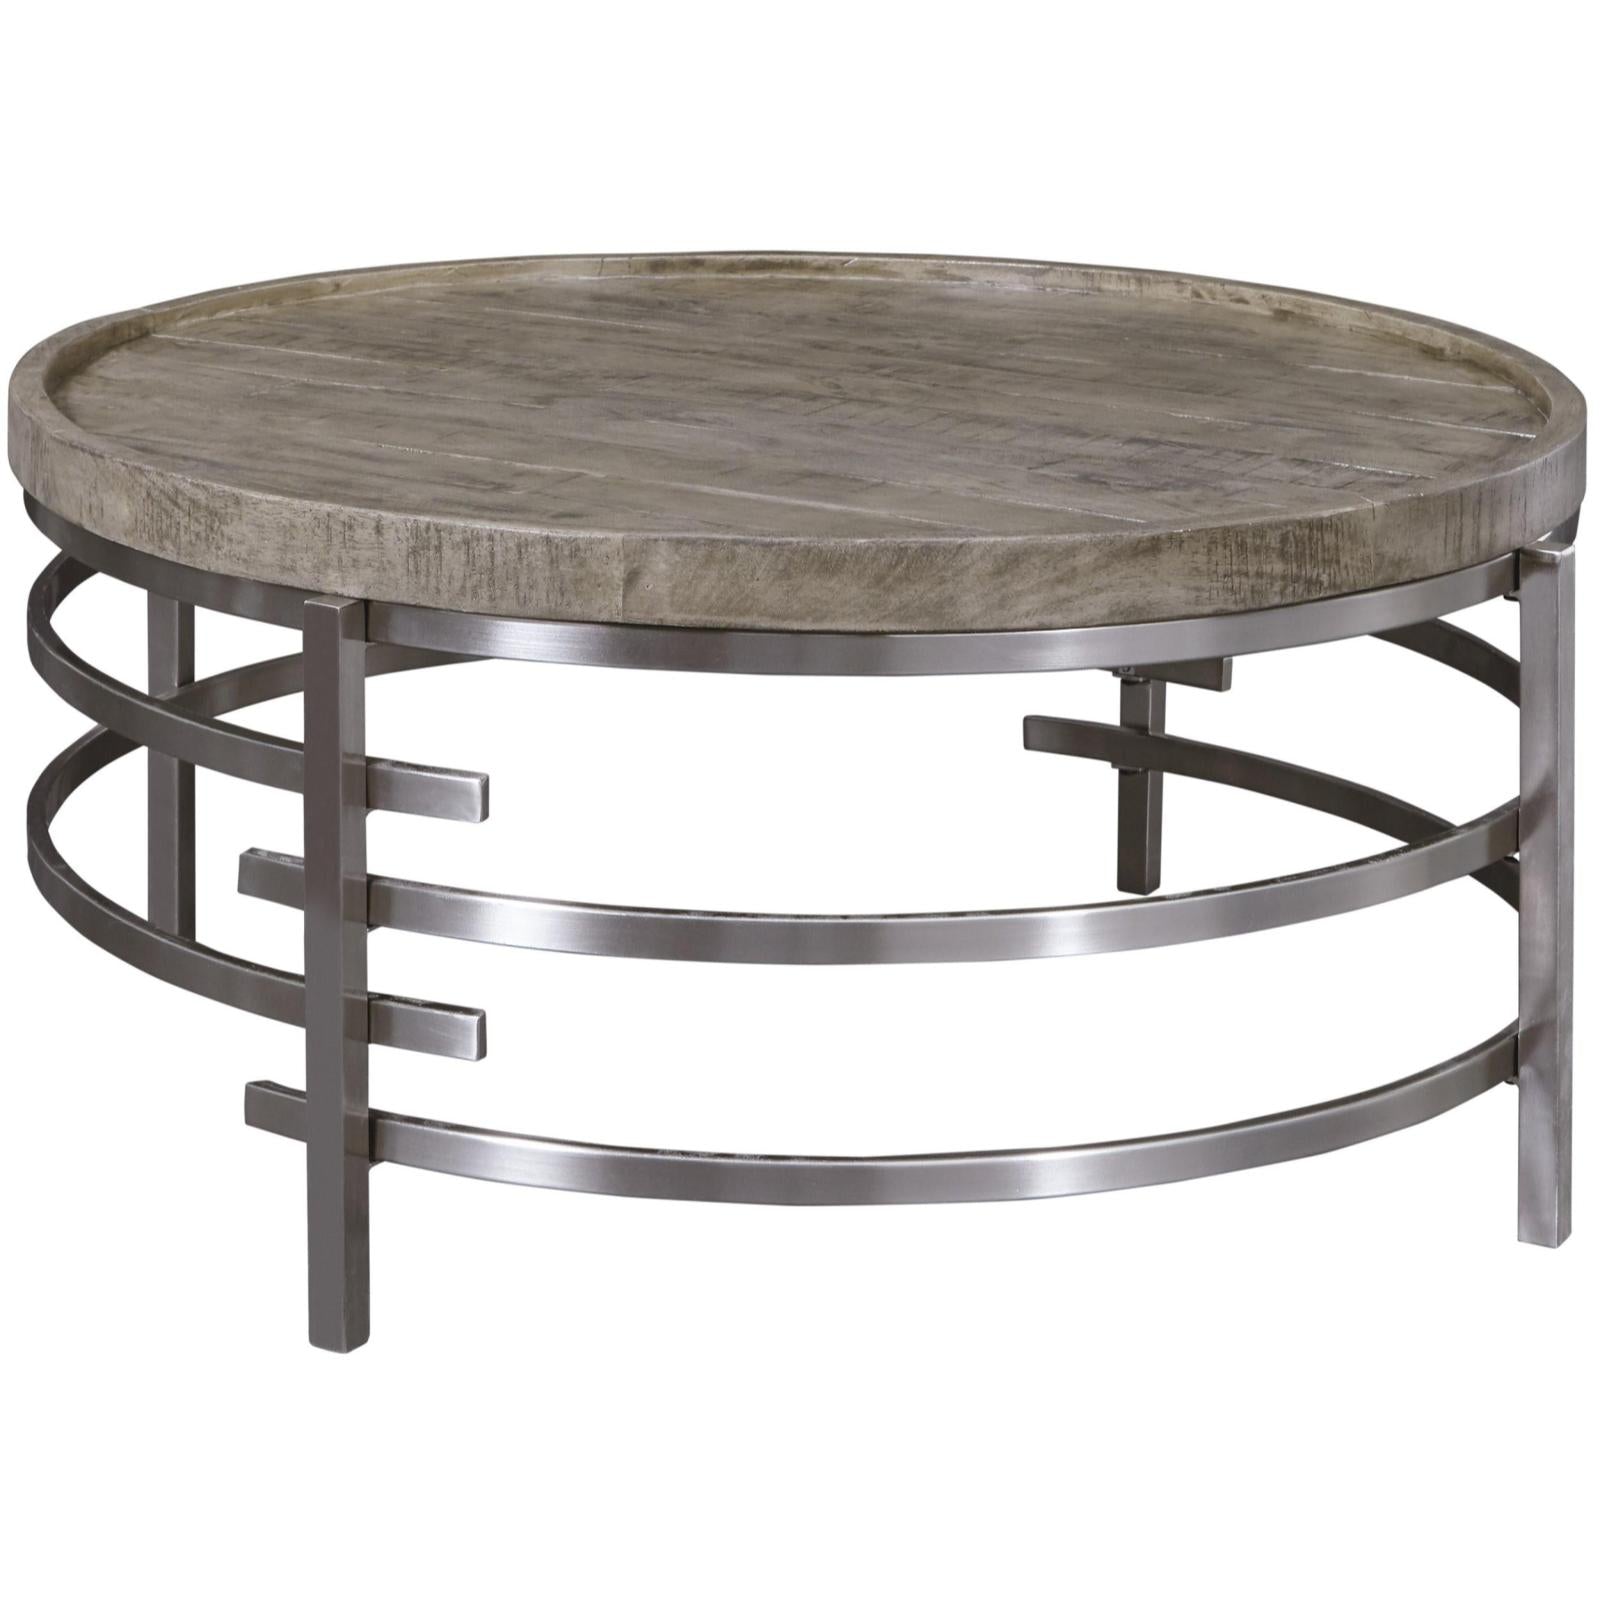 Zinelli Round Coffee Table, Occasional Tables, Ashley Furniture - Adams Furniture